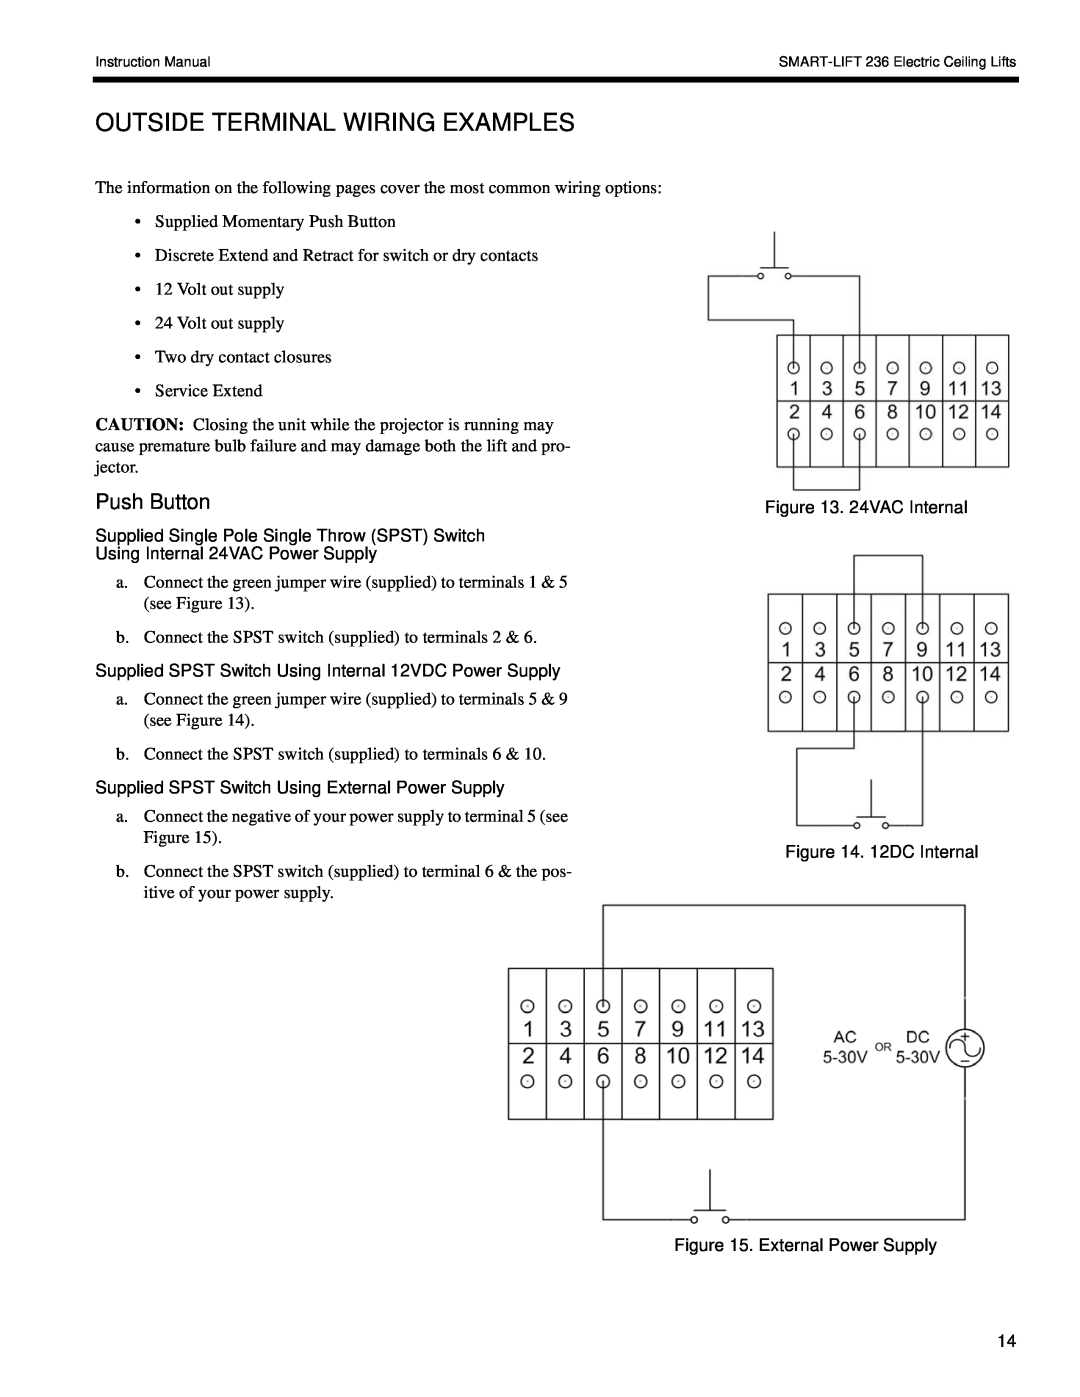 Chief Manufacturing SL-236 installation instructions Outside Terminal Wiring Examples, Push Button 